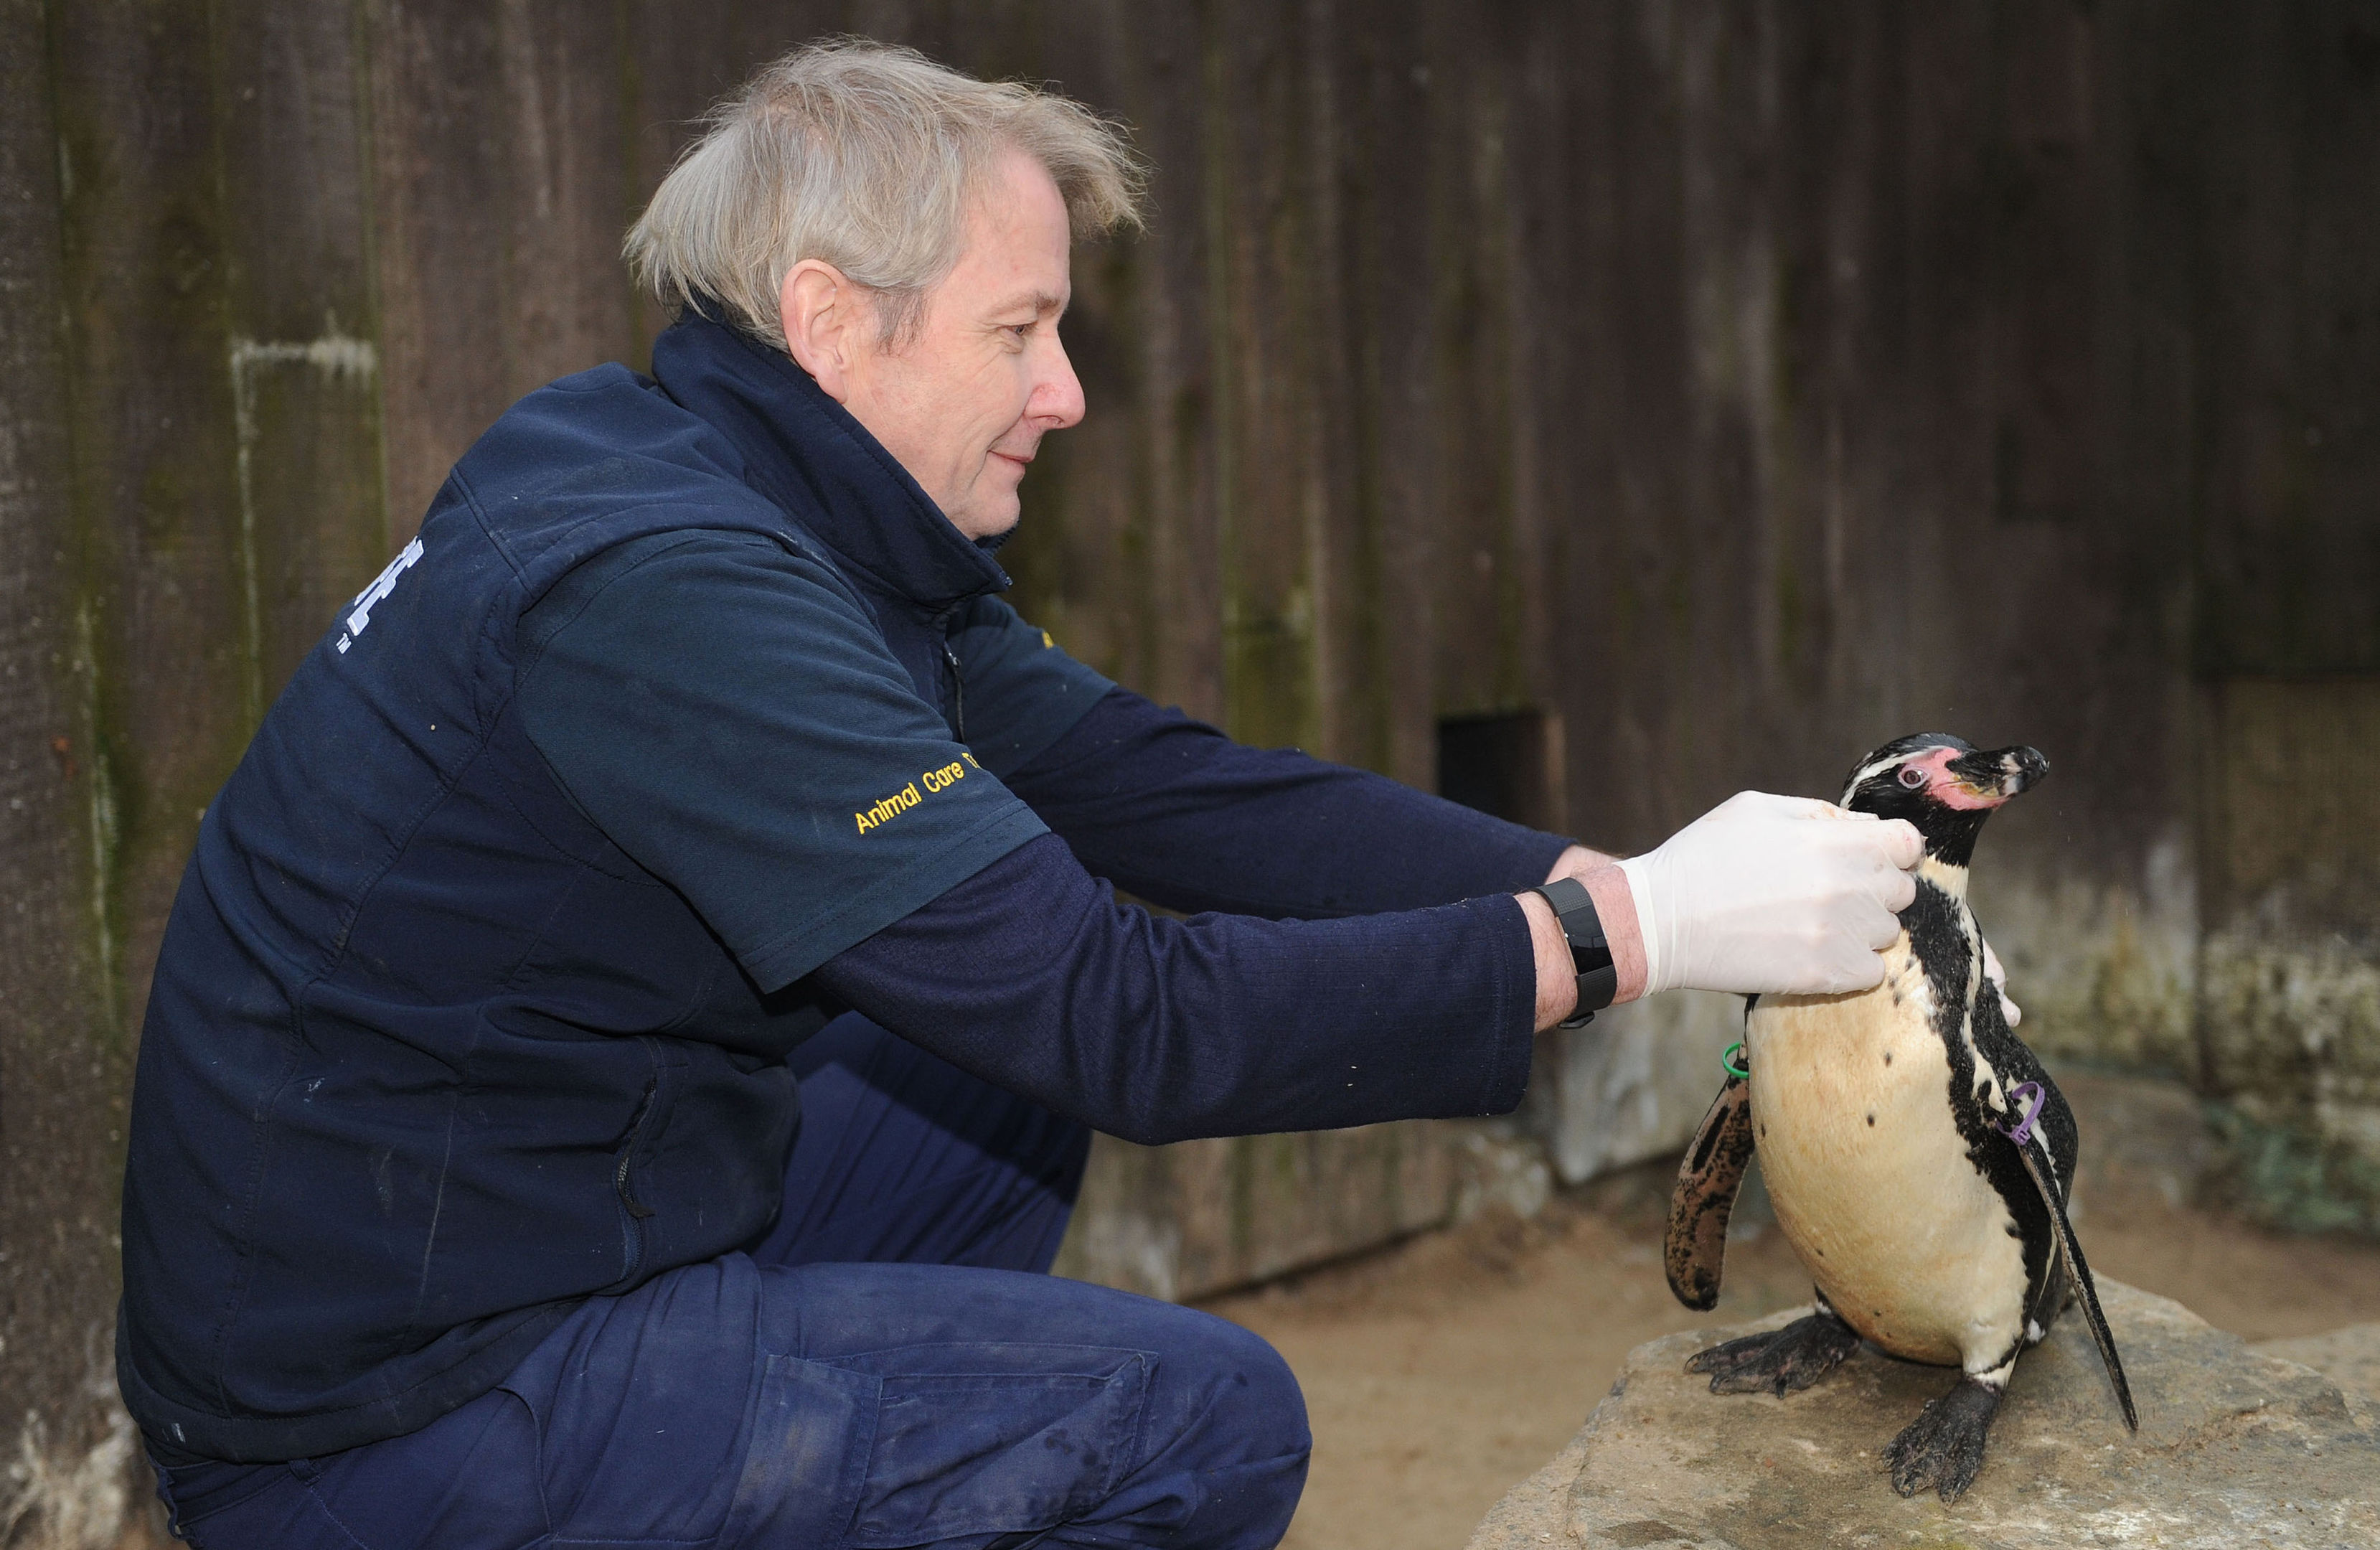 Dippy the Humboldt penguin who has forged a friendship with 57-year-old aquarist (Jeremy Durkin/Great Yarmouth Sea Life Centre /PA Wire)